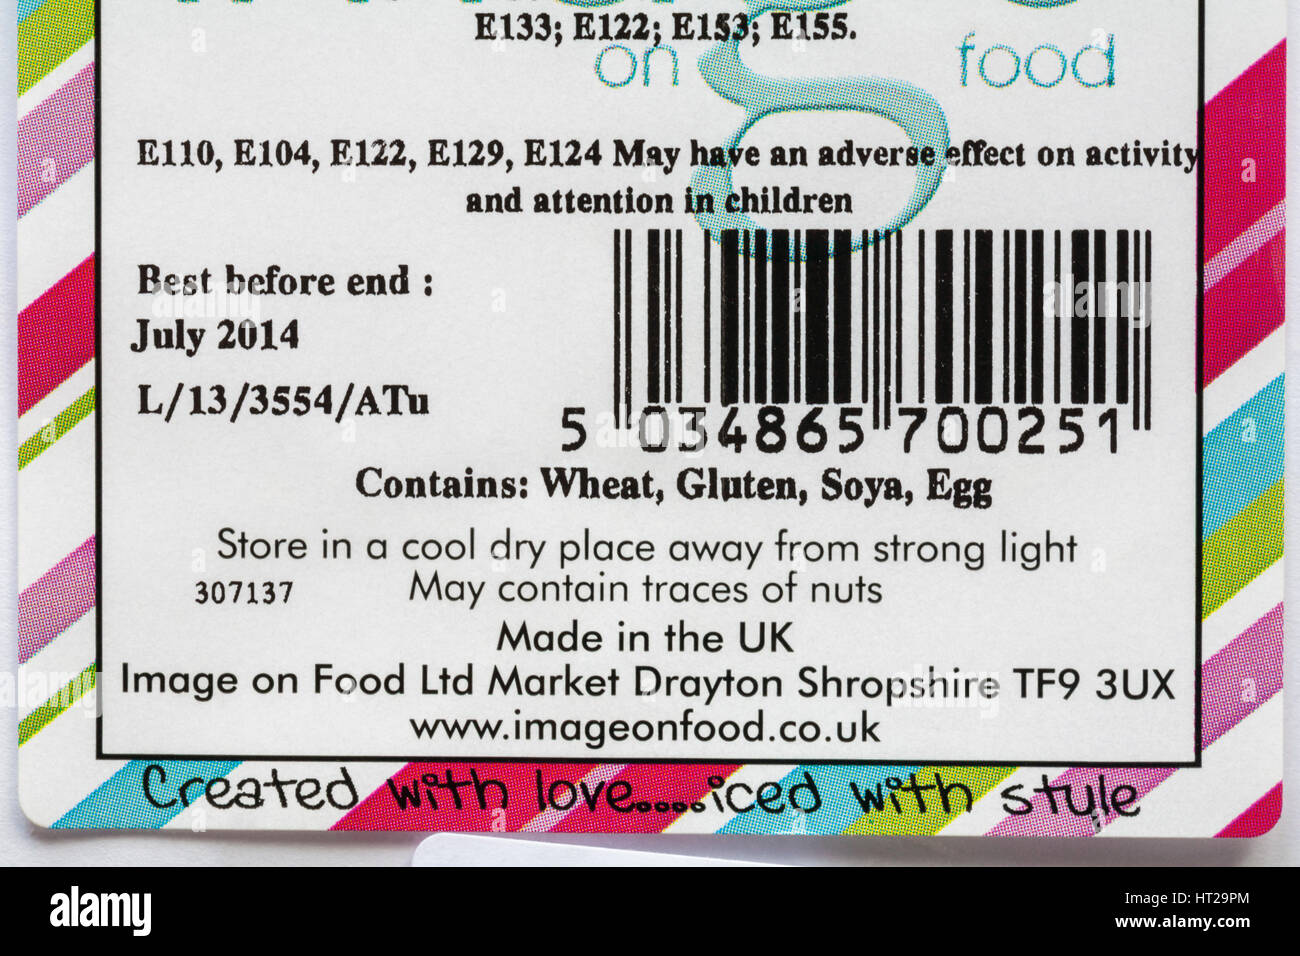 Information showing E numbers may have an adverse effect on activity and attention in children. Contains wheat gluten soya egg. Made in the UK. Food Stock Photo